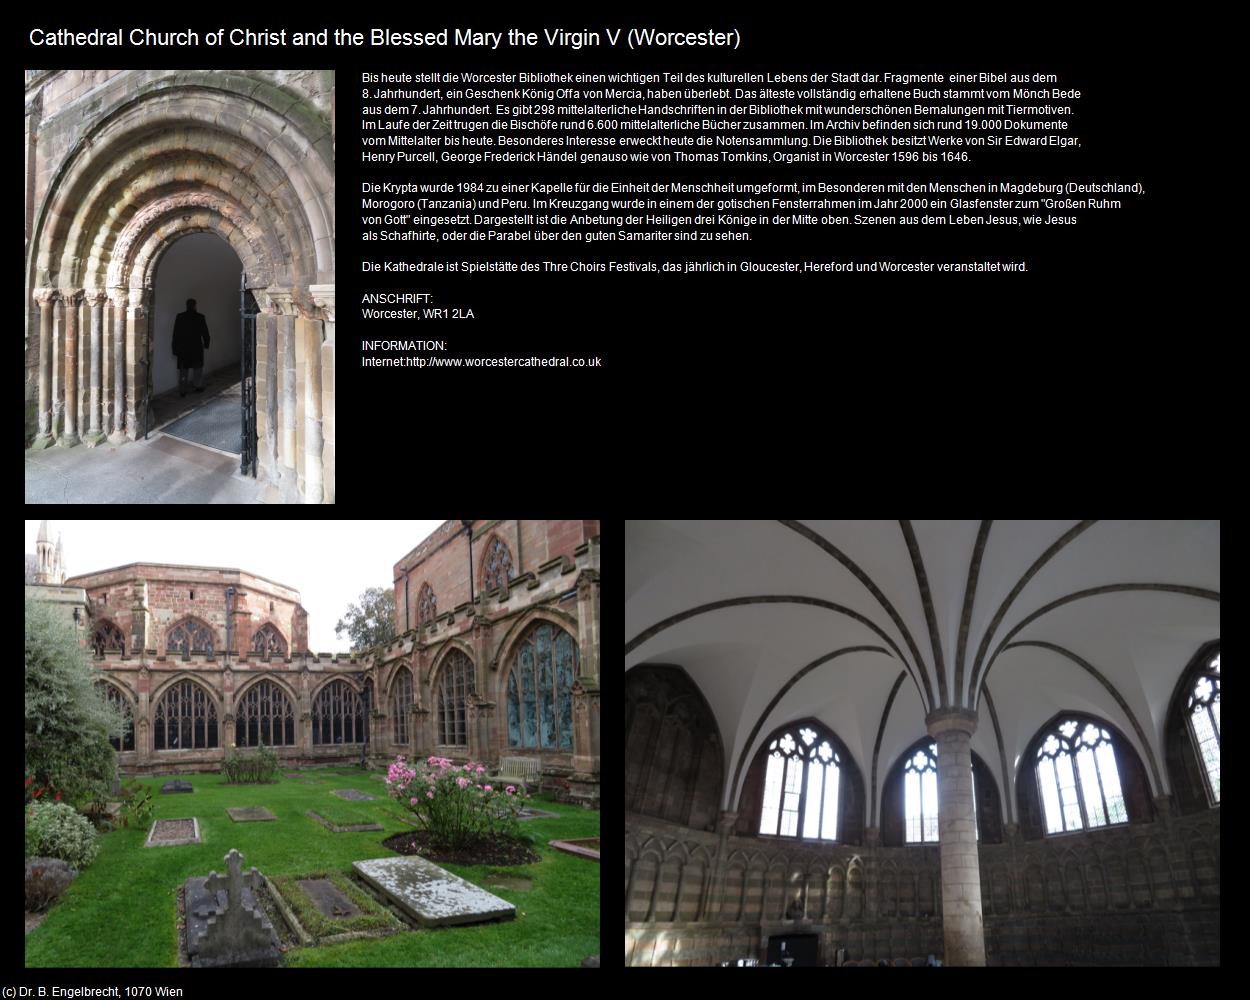 Cathedral Church of Christ and the Blessed Mary the Virgin V  (Worcester, England) in Kulturatlas-ENGLAND und WALES